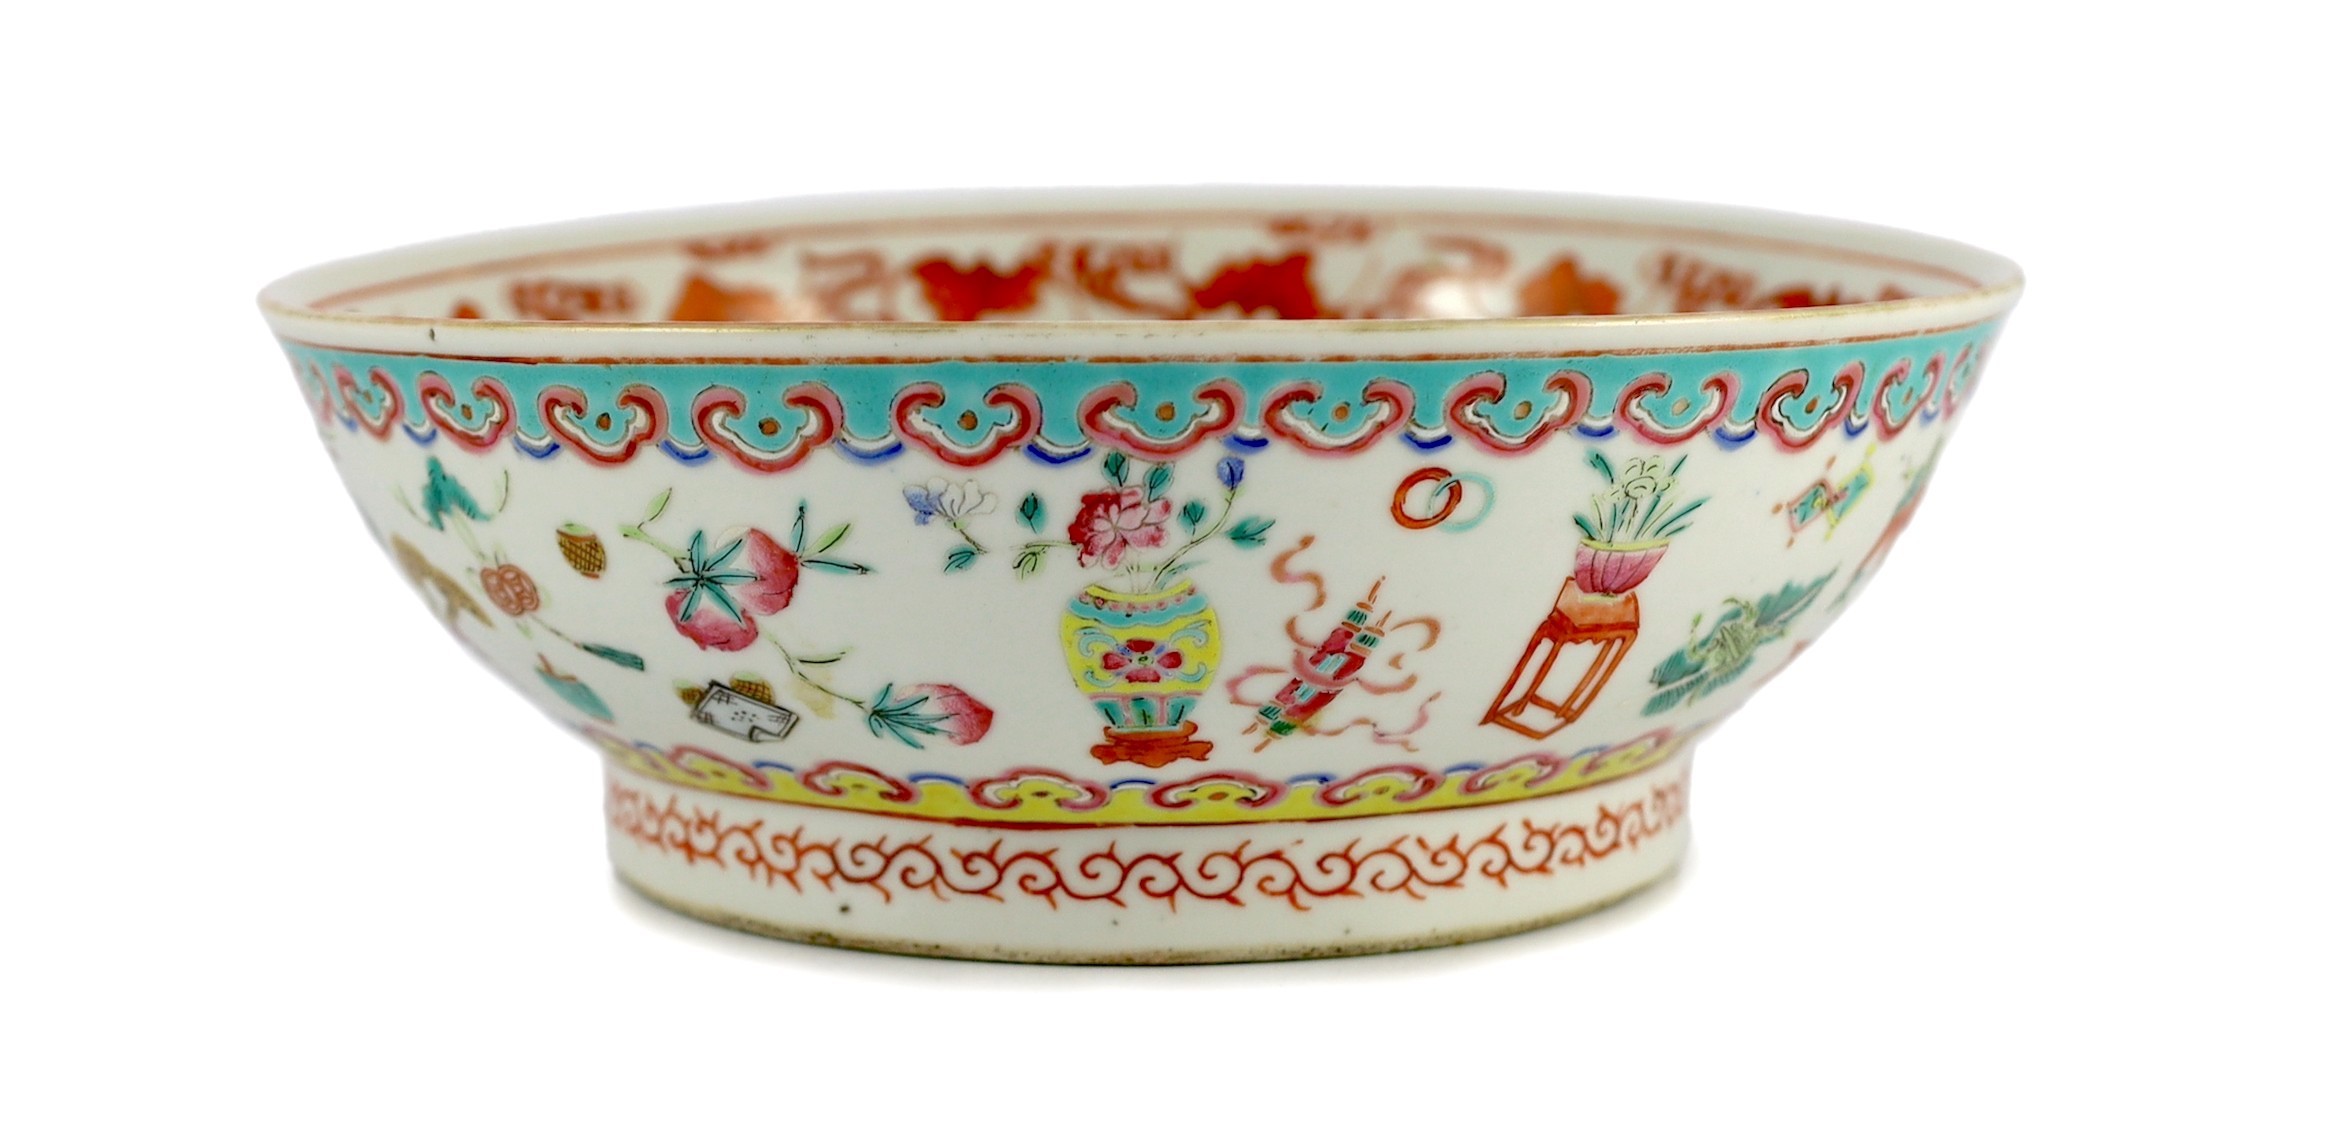 A Chinese famille rose ‘antiques and auspicious objects’ bowl, Chenghua mark, late 19th century, 26.7cm wide, mis-shapen                                                                                                    